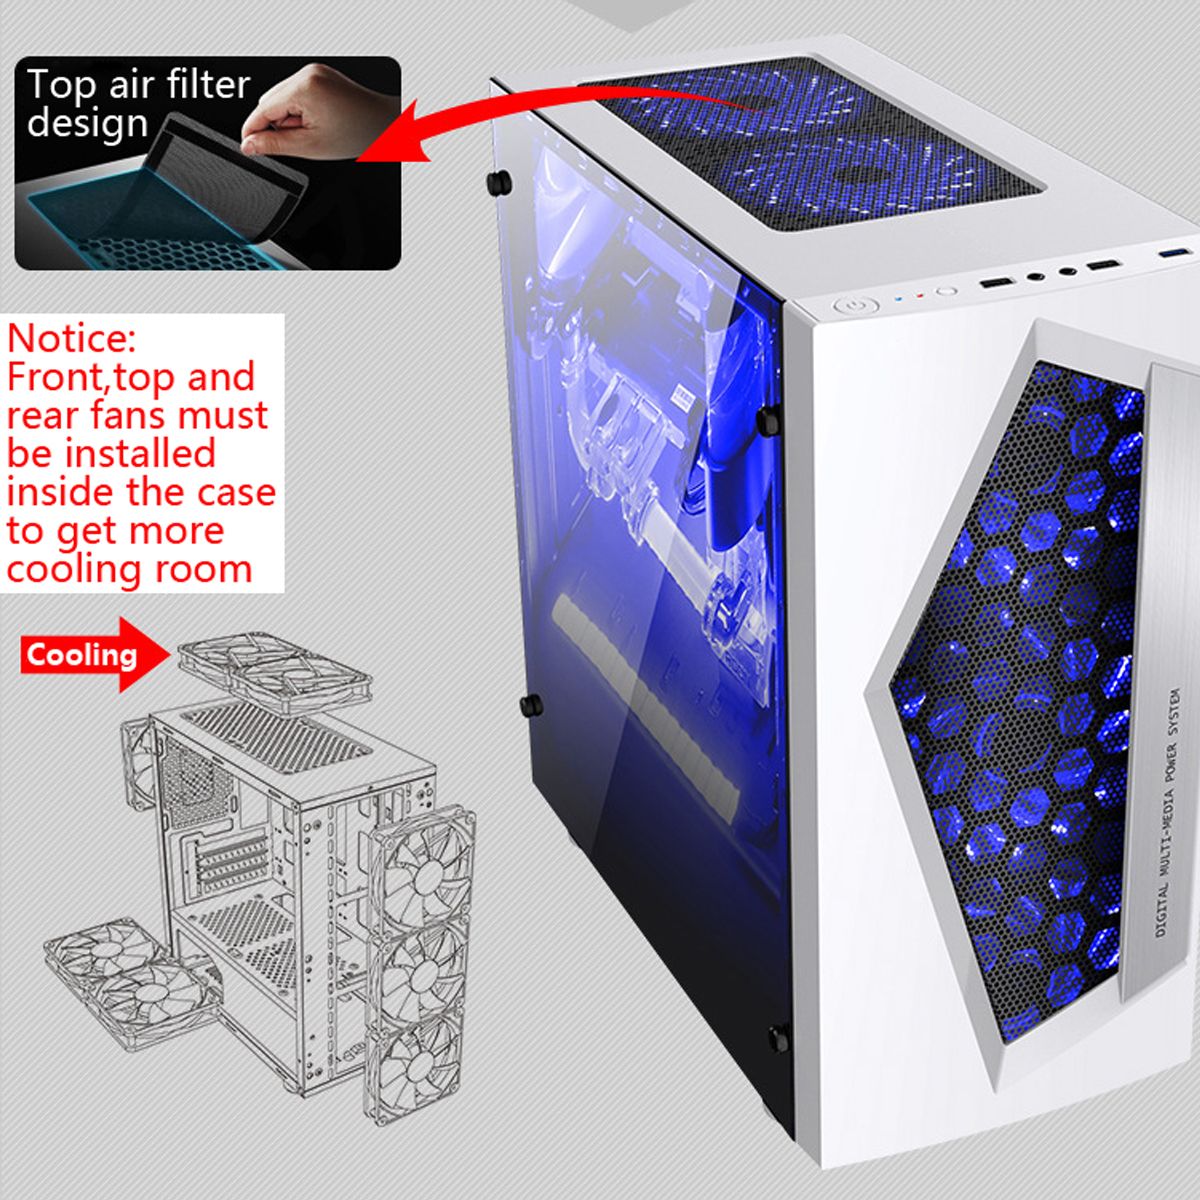 V3-Micro-ATX-Computer-Case-Gaming-PC-8-Fan-Ports-USB-30-For-M-ATX-Mini-ITX-motherboards-1227500